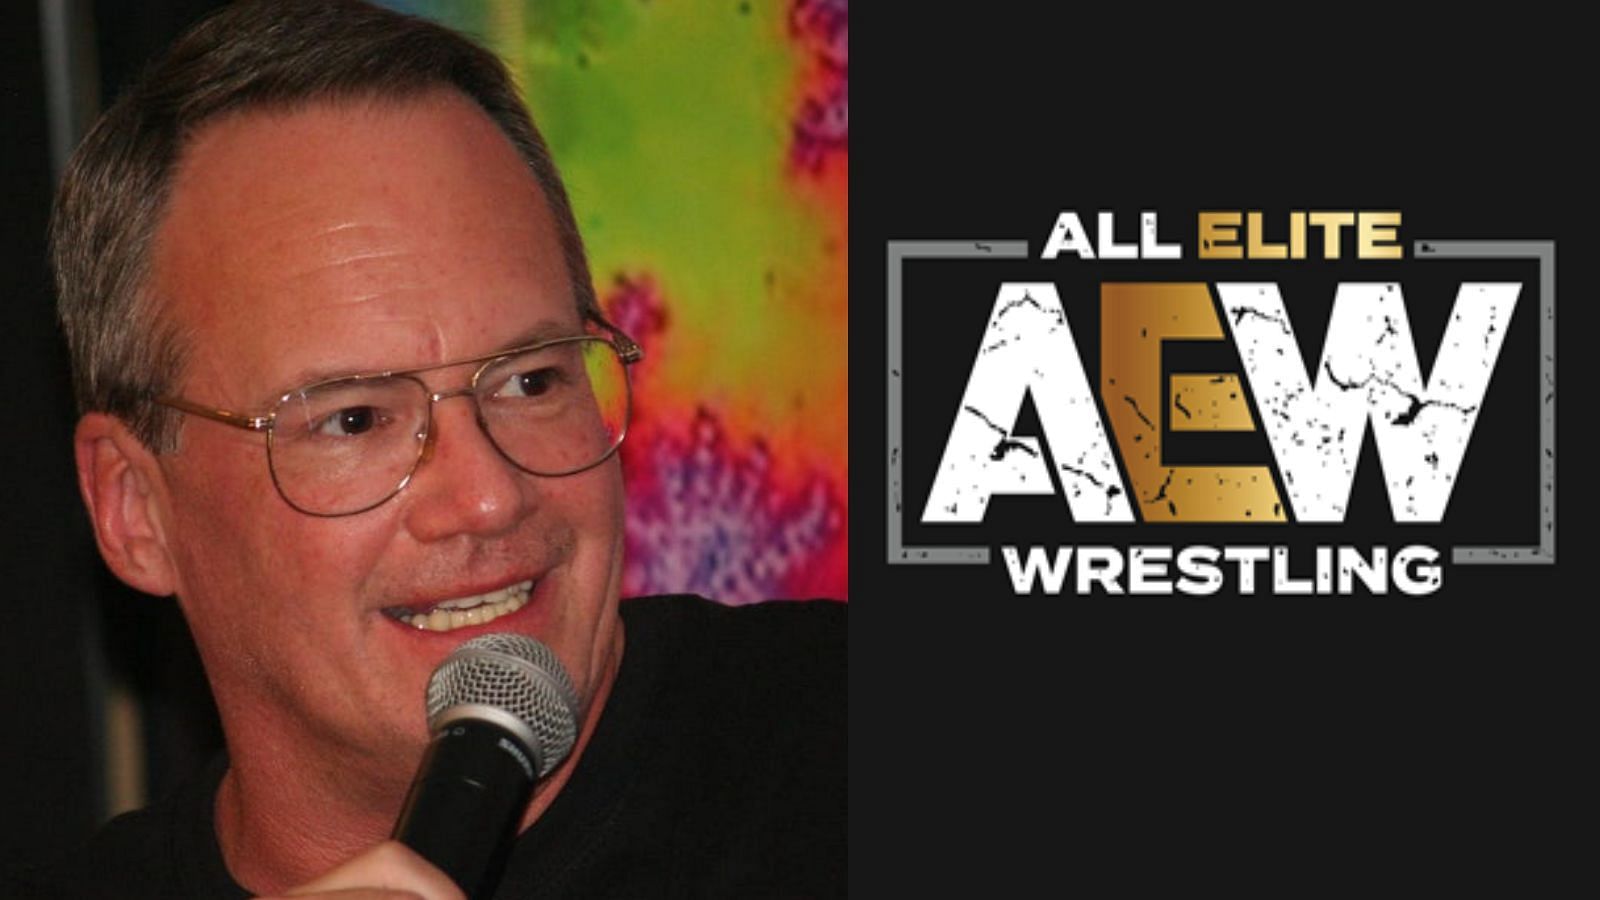 Cornette has been very open about his criticism surrounding AEW talent.